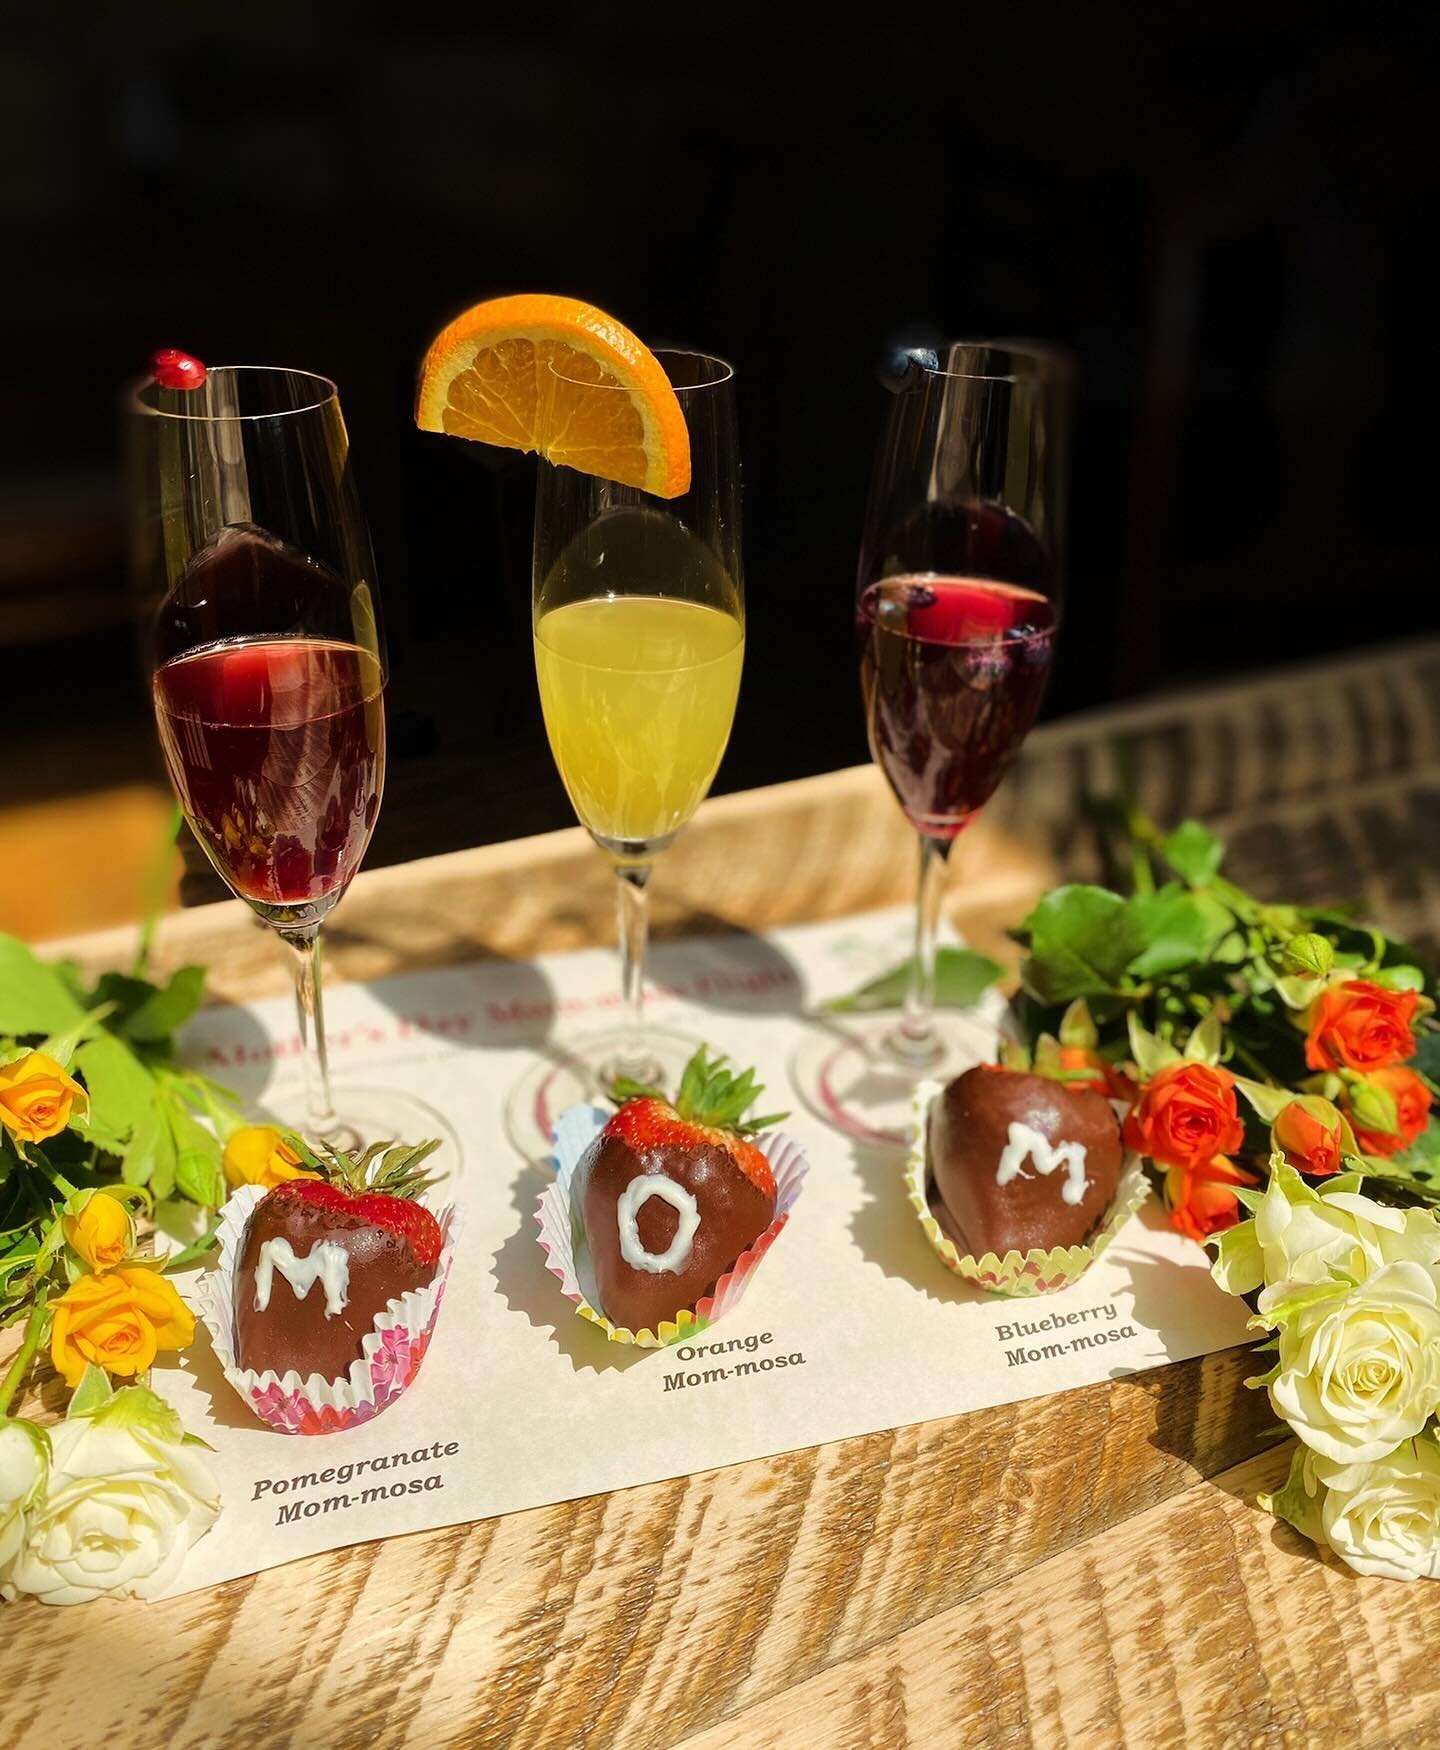 🥂🍓MOM-osa Flight with Chocolate Covered Strawberries will be available all day tomorrow for Mother&rsquo;s Day! 
&hearts;️ Also, looking for the perfect Mom gift?  Give her the gift of LOVE with our Five Vines gift card - available on our website s